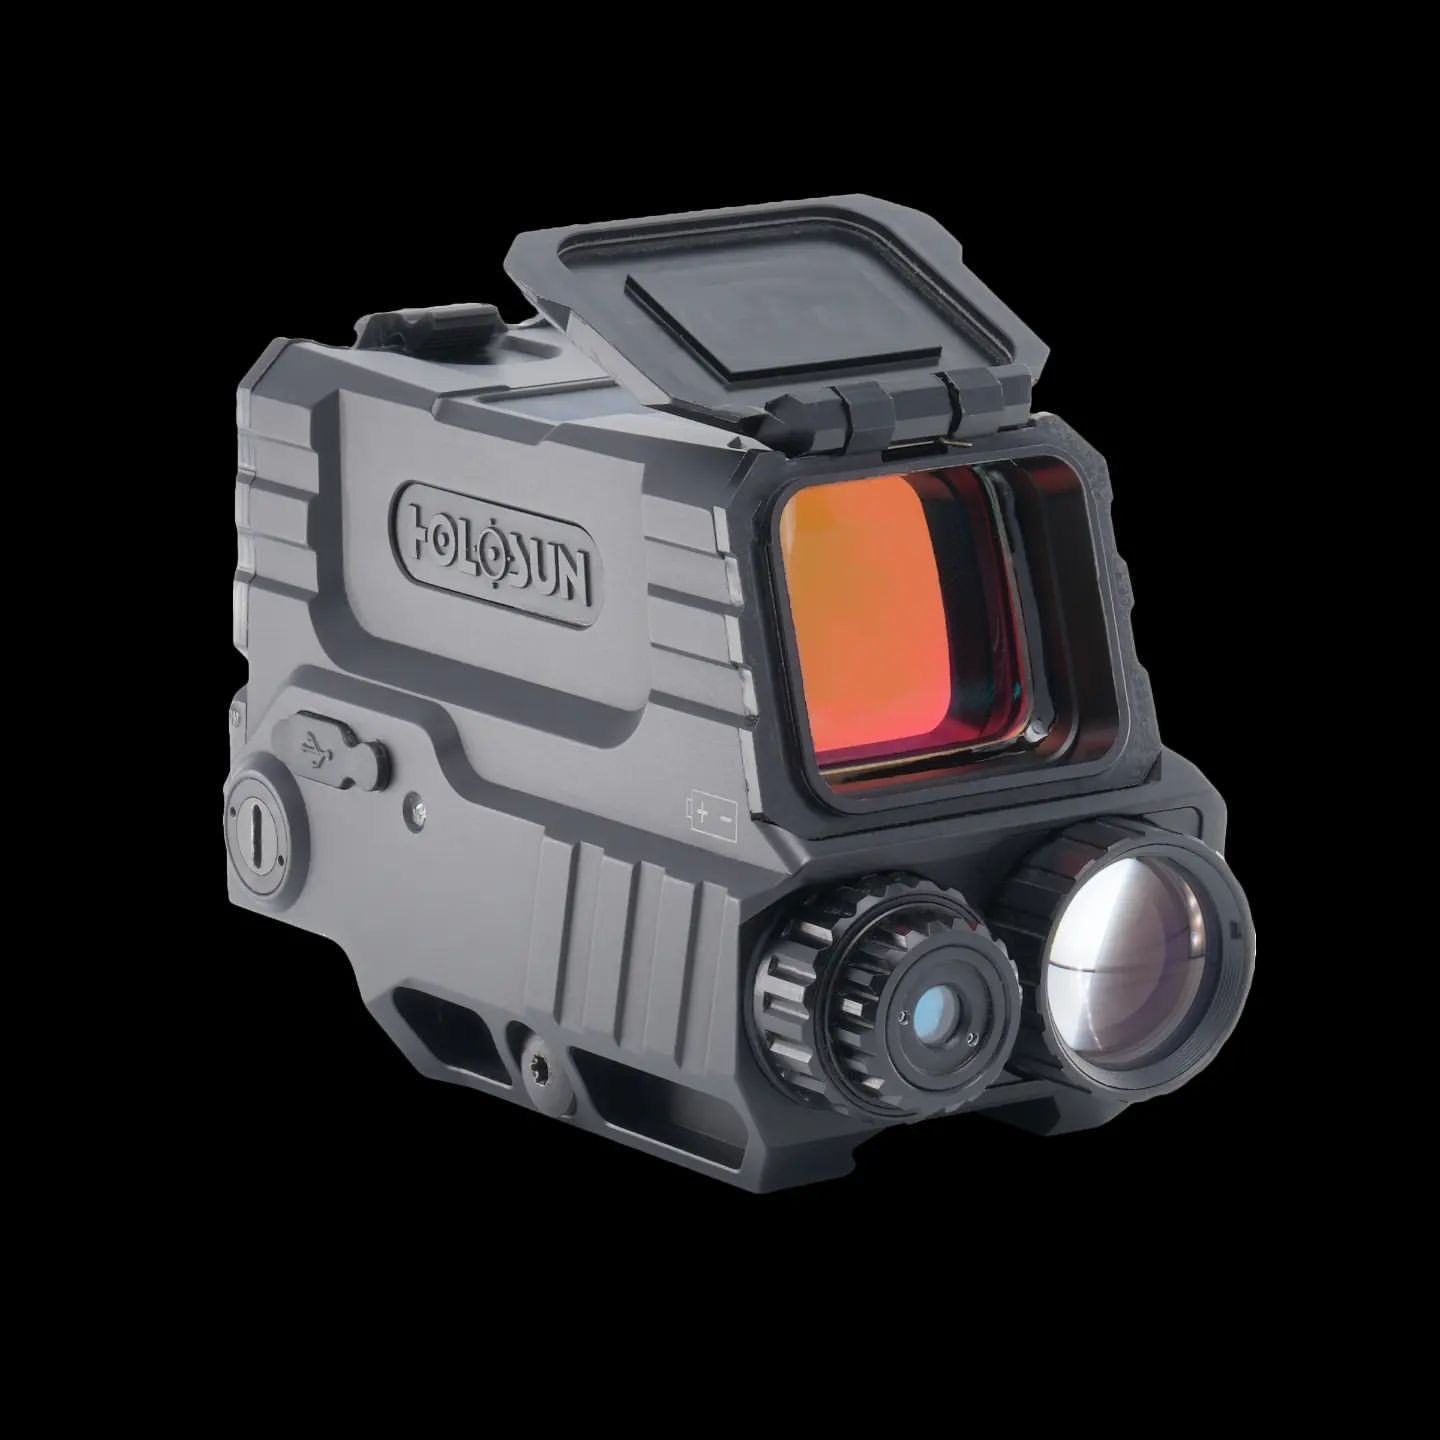 Shot Show 23 Digital Reflex Sight Thermal And Night Vision From Holosun